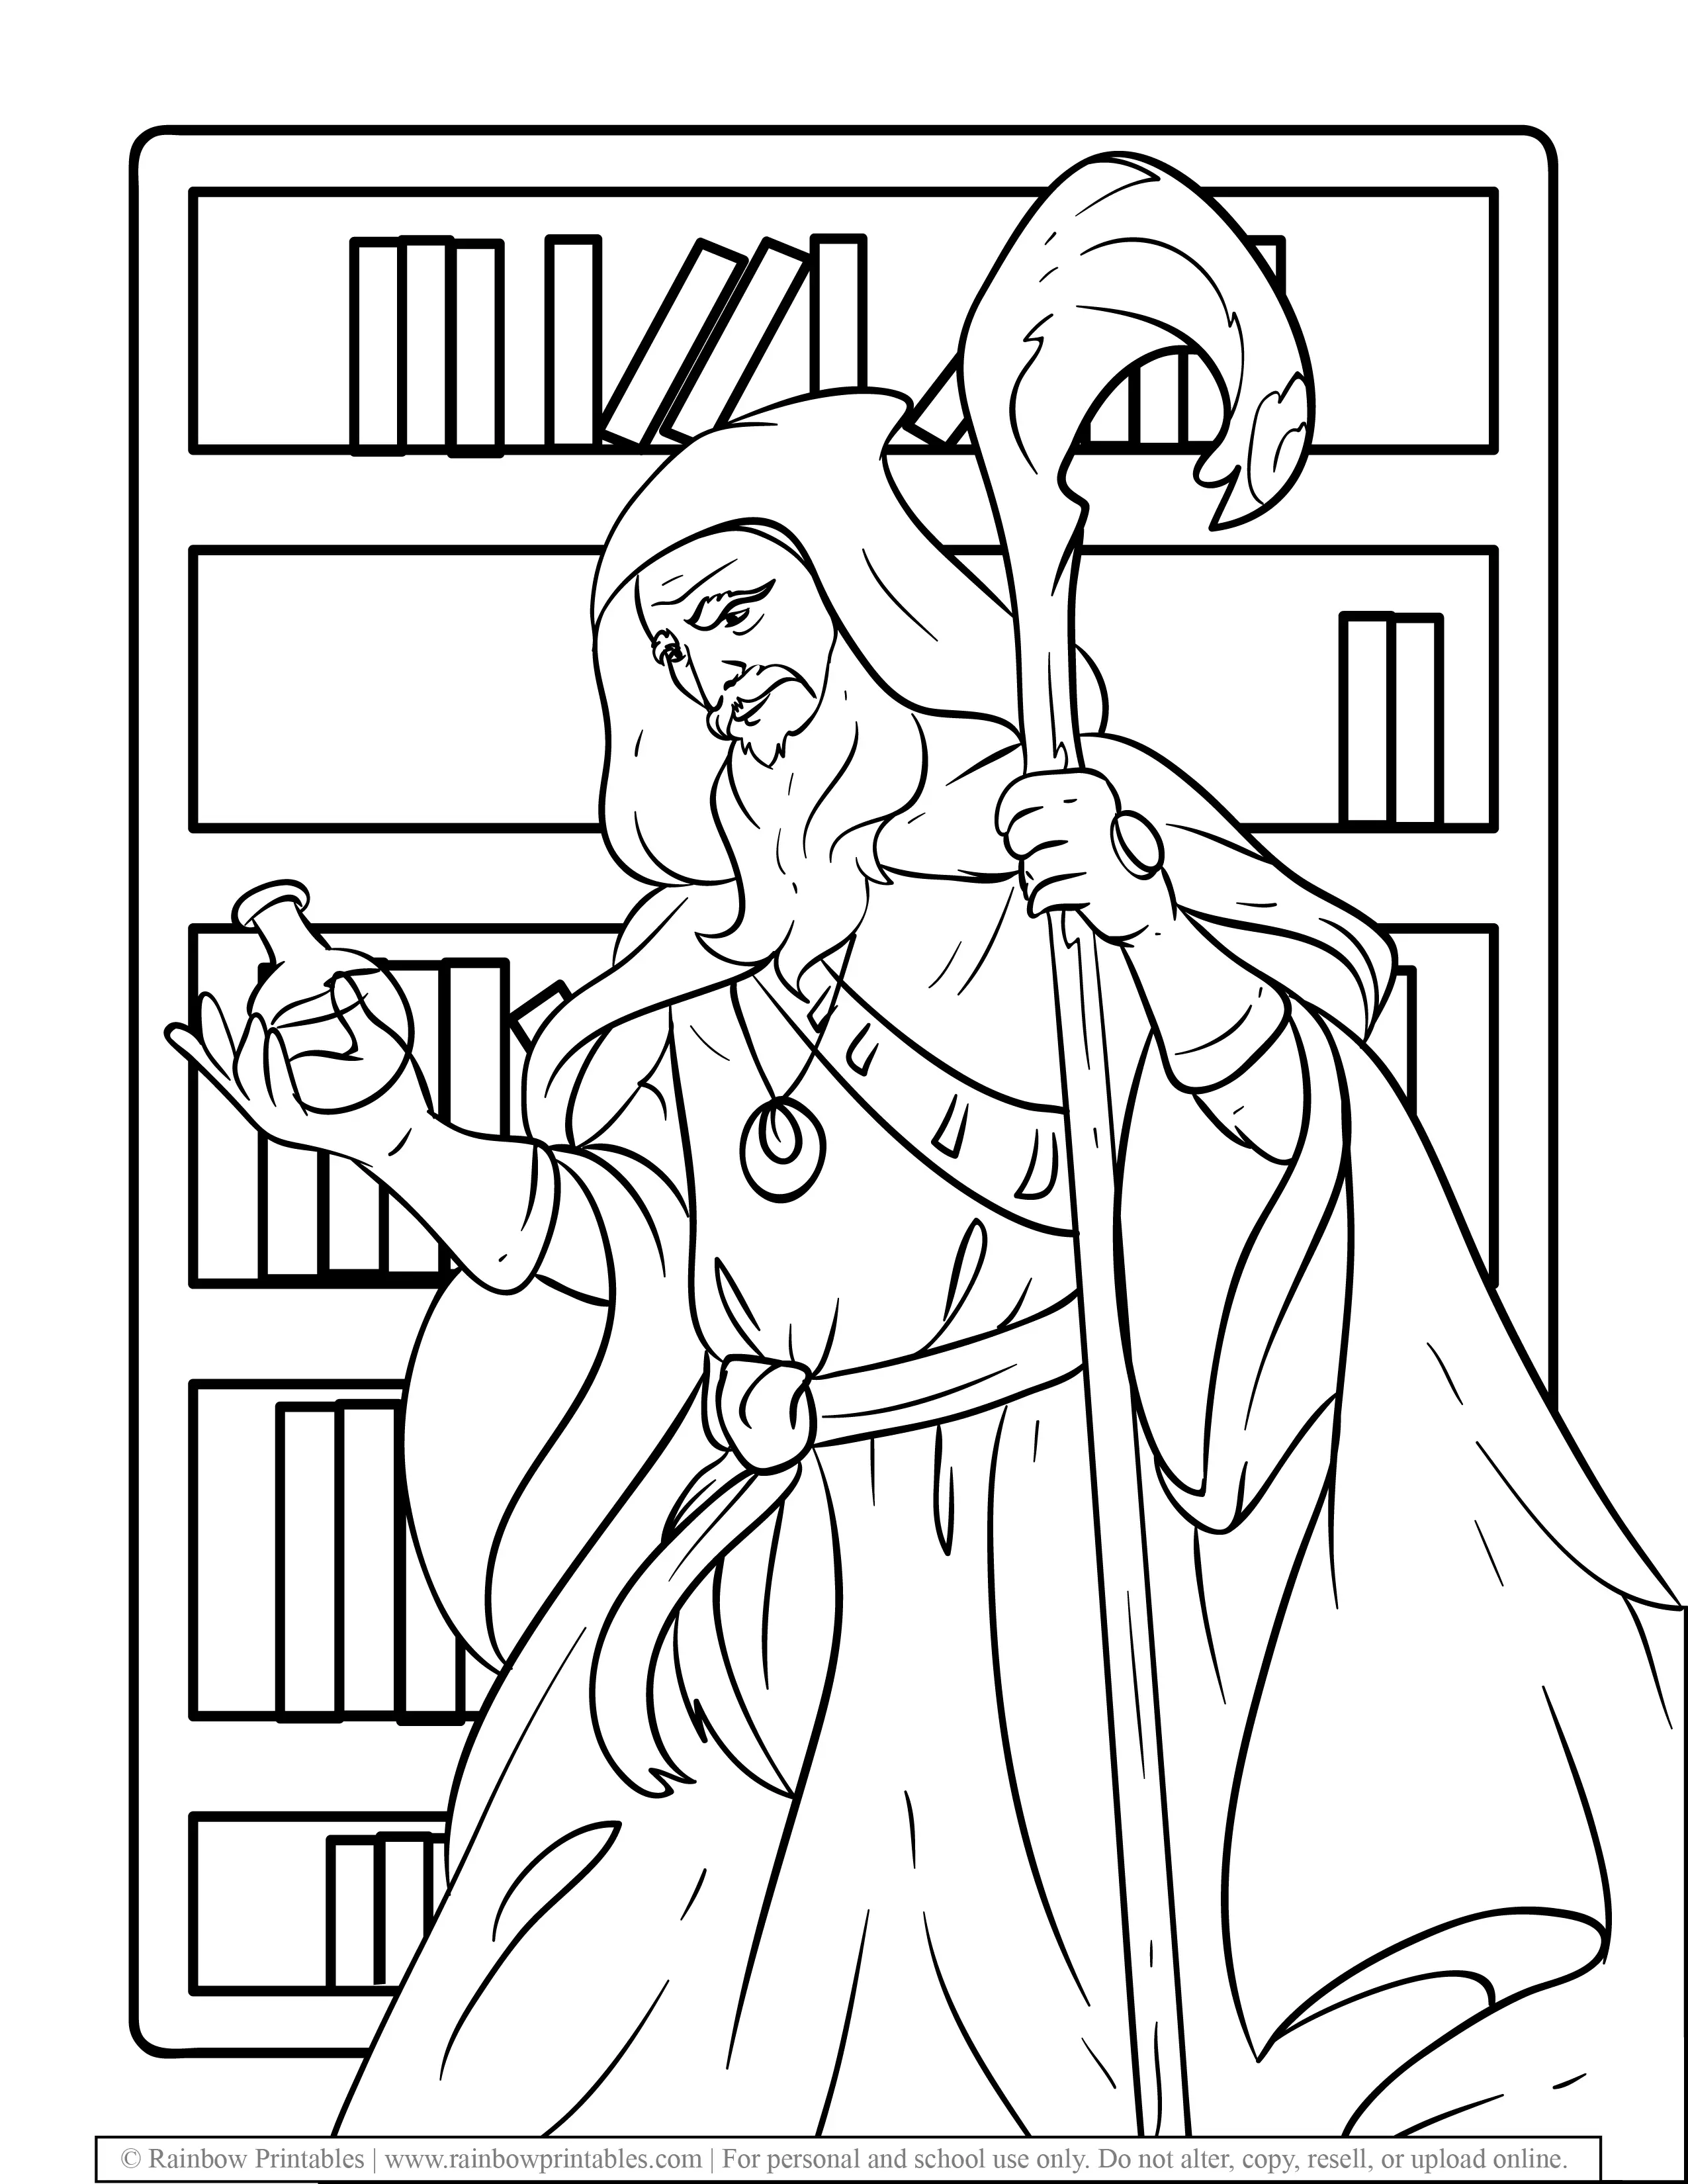 Smart Old Wizard Holding Potion Bookcase With Staff and Beard Cloak Robe Mythological Coloring Pages for Kids Fantasy